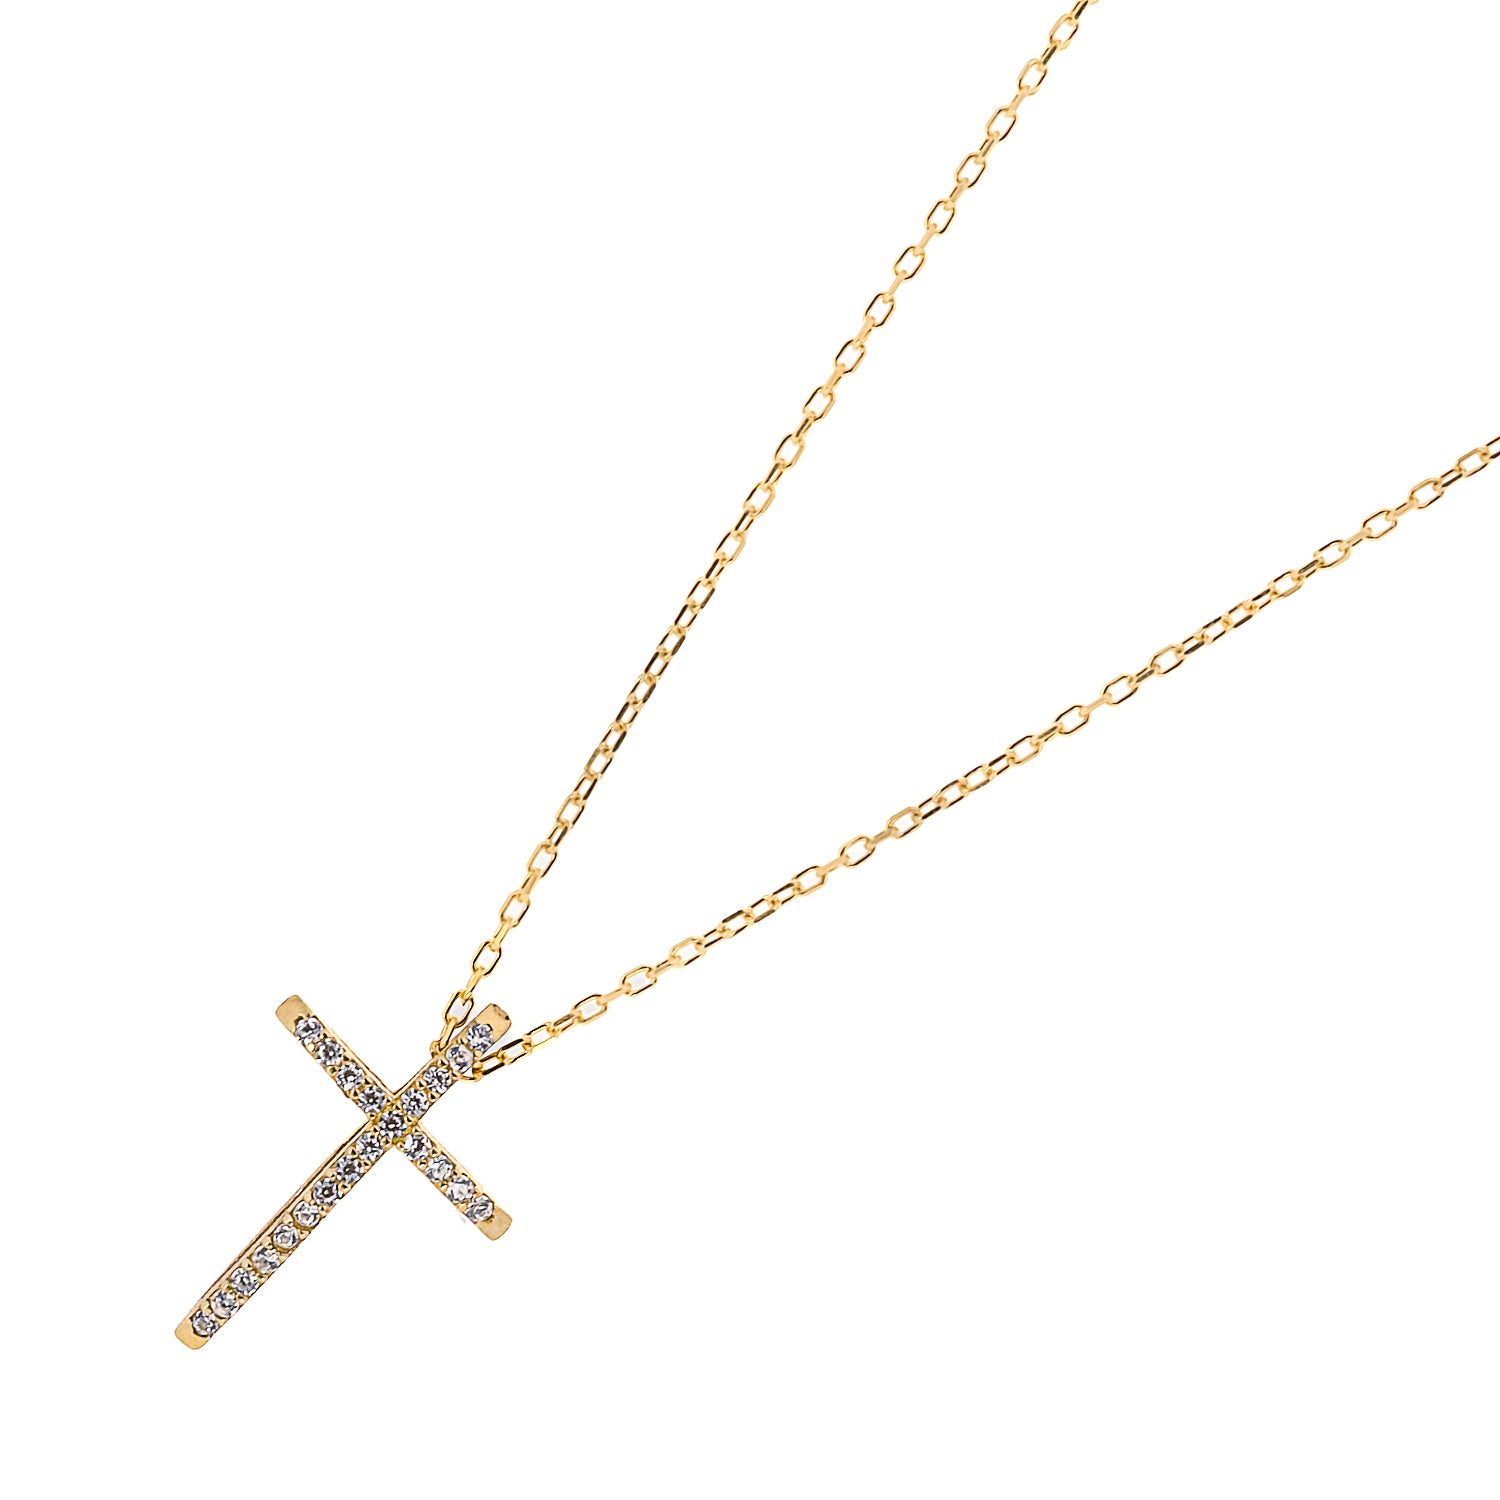 A detailed shot of the shimmering CZ diamonds on the cross pendant of the Unique Cross Diamond Necklace.